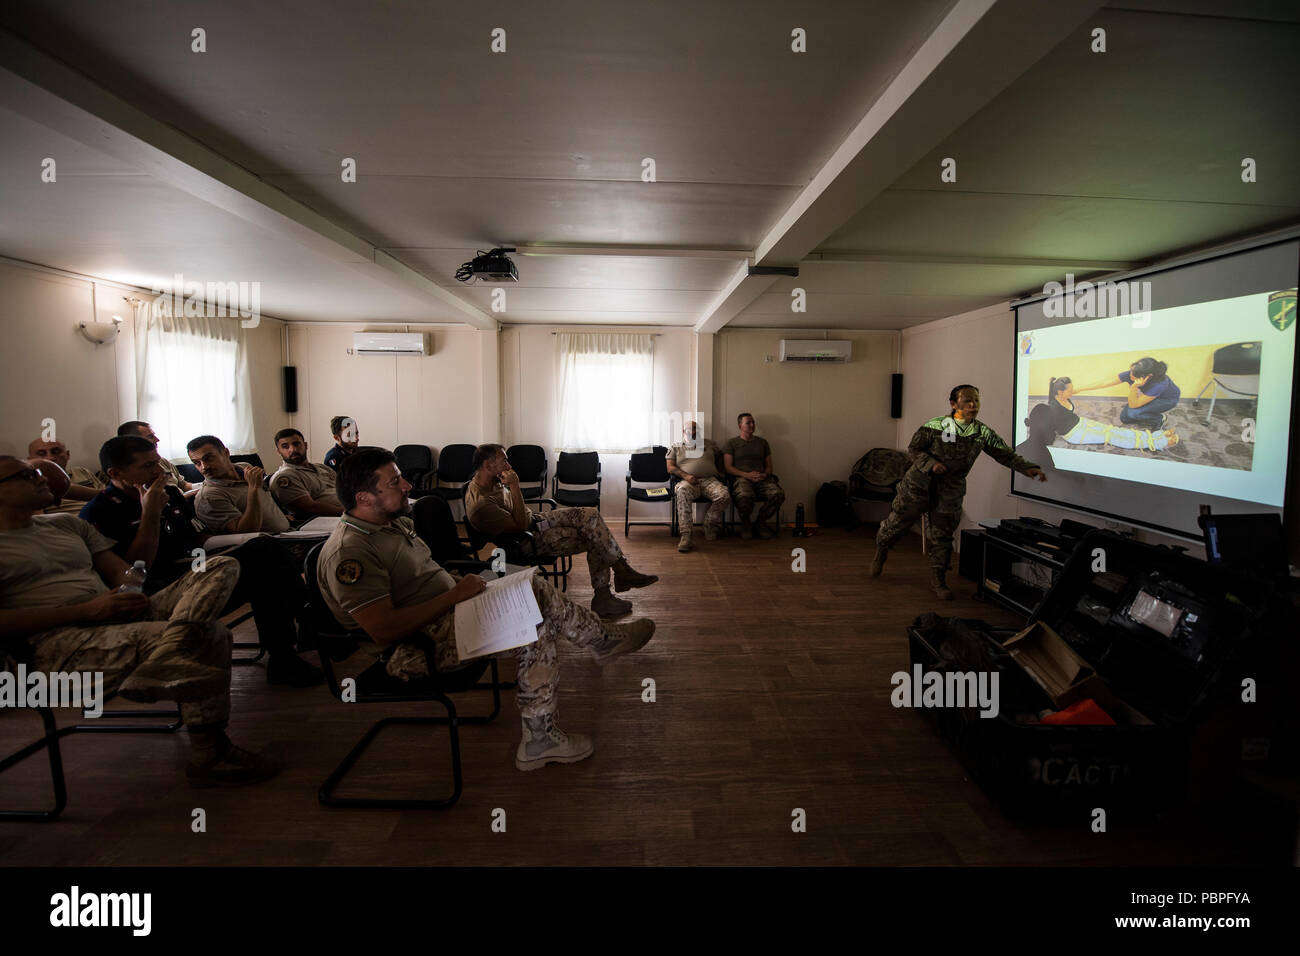 U.S. Army Capt Stacey Suttles, a physician assistant assigned to the 404th Civil Affairs Battalion, Airborne, leads a block of instruction during the combat lifesaver skills course at the Base Militare Italiana di Supporto, Djibouti, July 20, 2018. The joint-coalition force CLS training provided an opportunity to teach new combat life saving procedures, while strengthening operational capabilities between both nations.  (U.S. Air Force photo by Tech. Sgt. Larry E. Reid Jr.) Stock Photo